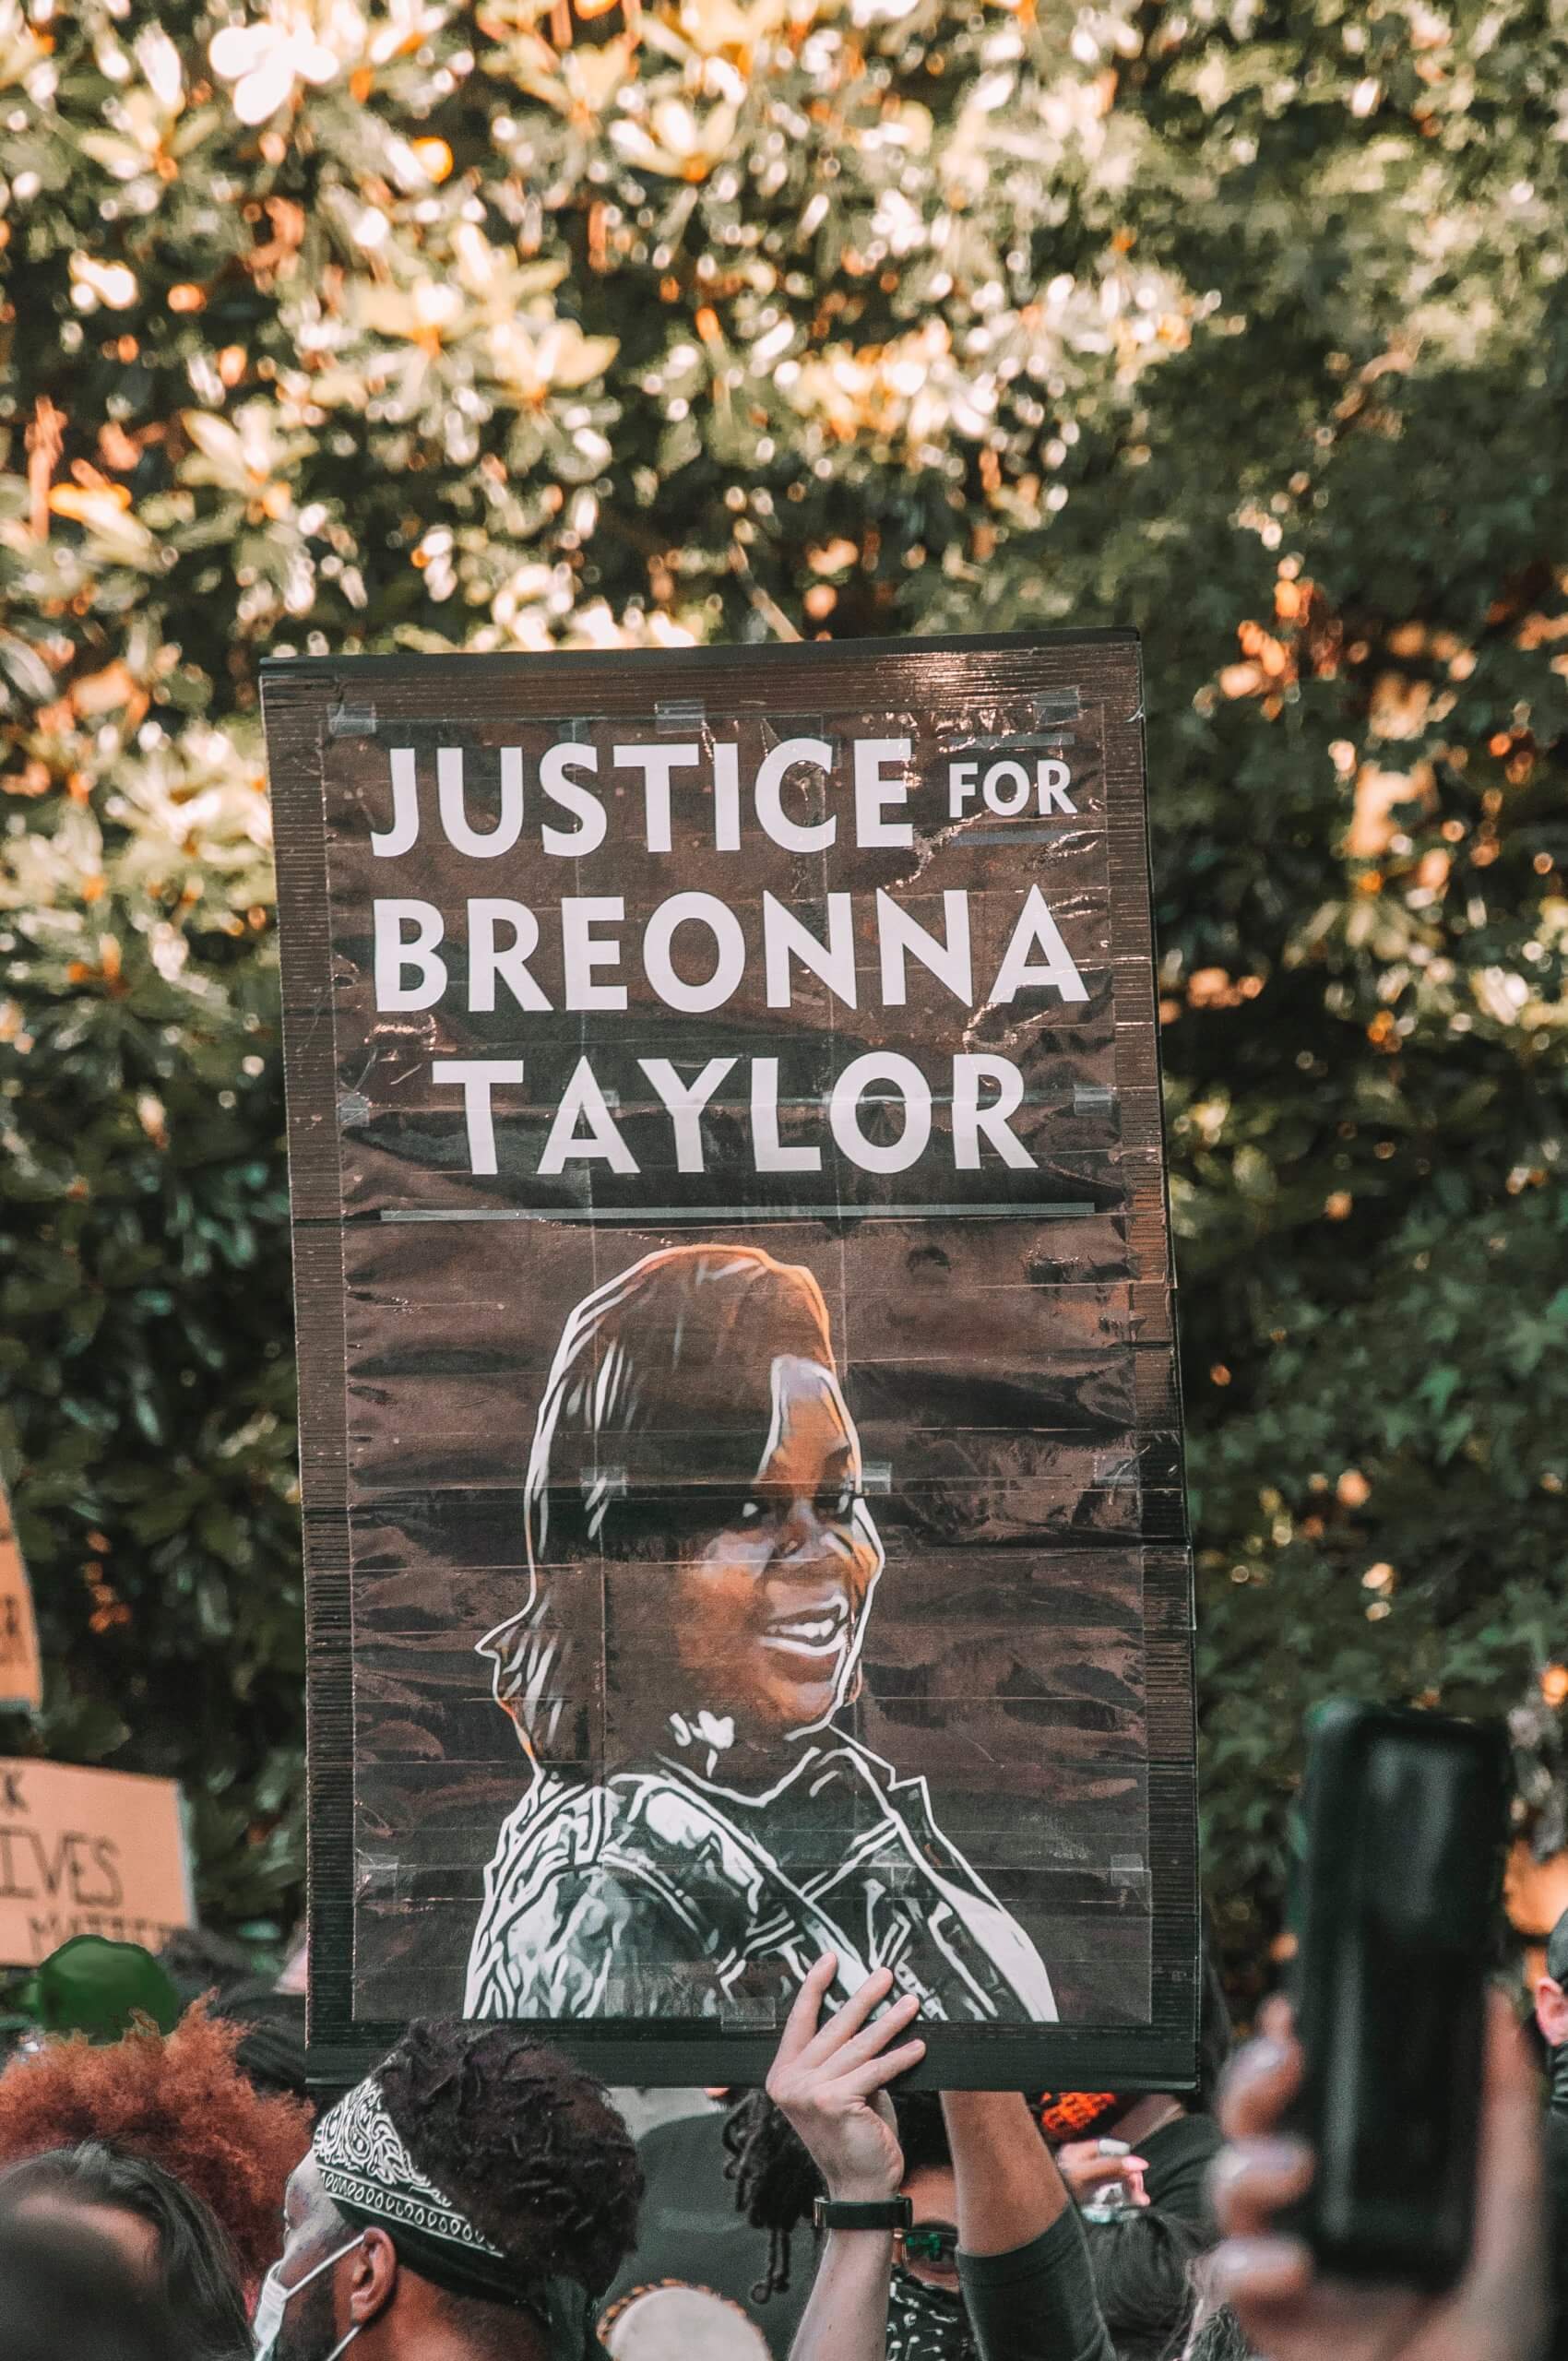 Person holding up sign that says, "Justice for Breonna Taylor" and a drawing of Breonna